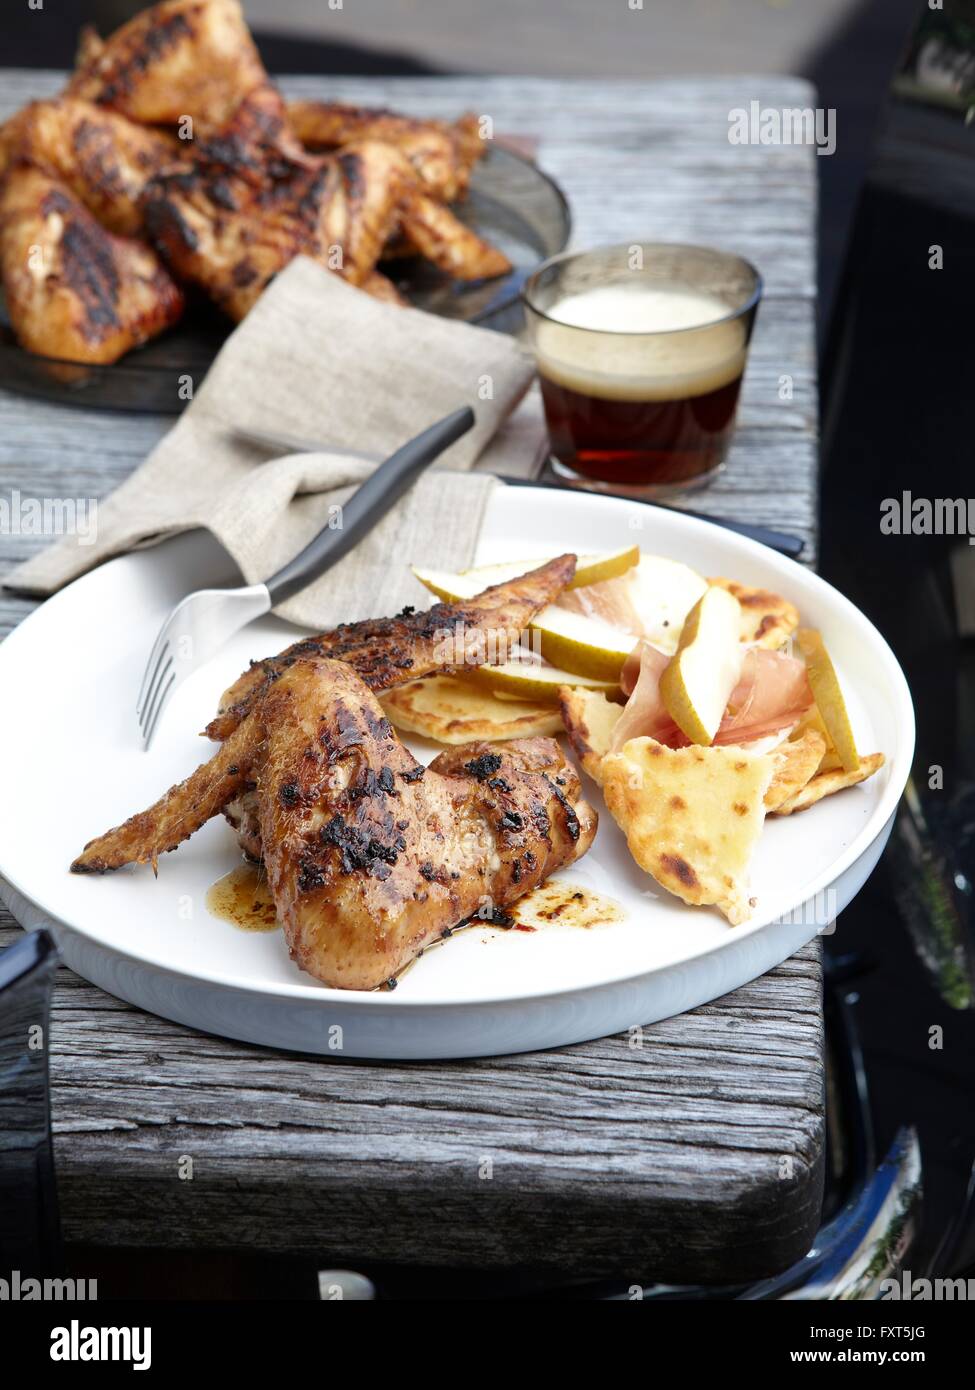 Barbecued spicy chicken wings with tumbler of beer Stock Photo